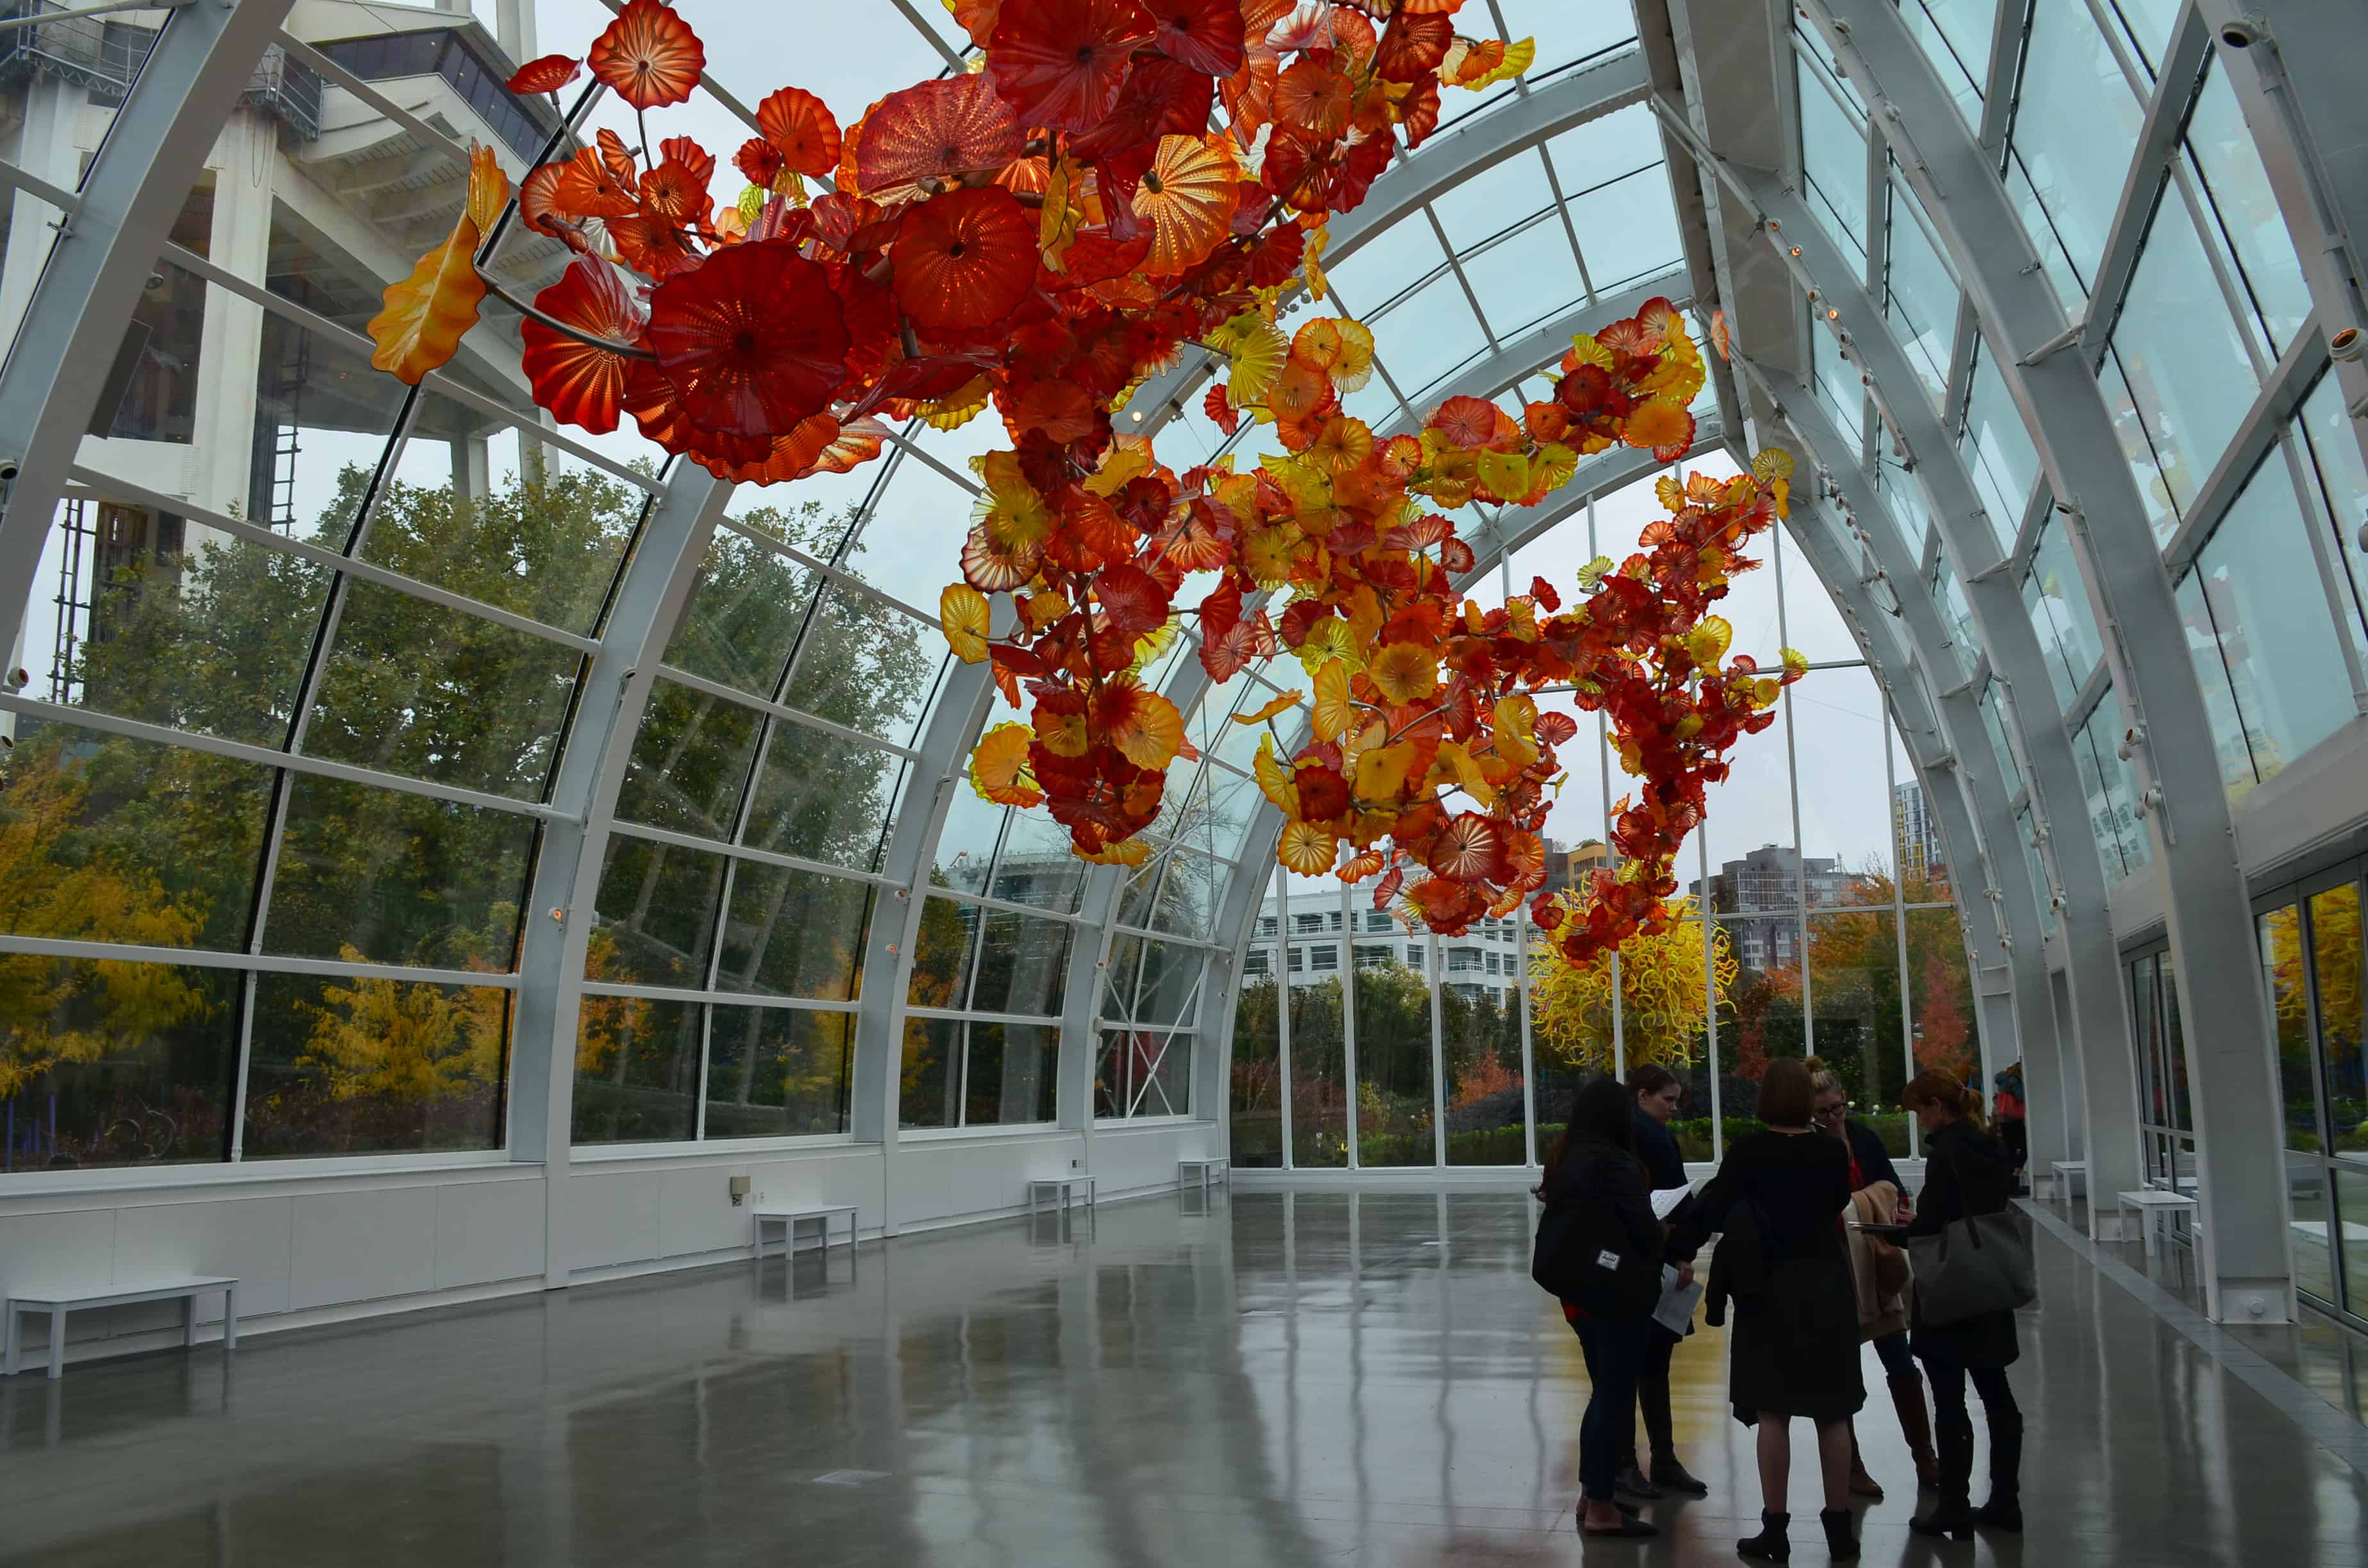 Inside the Glasshouse at Chihuly Garden and Glass in Seattle, Washington